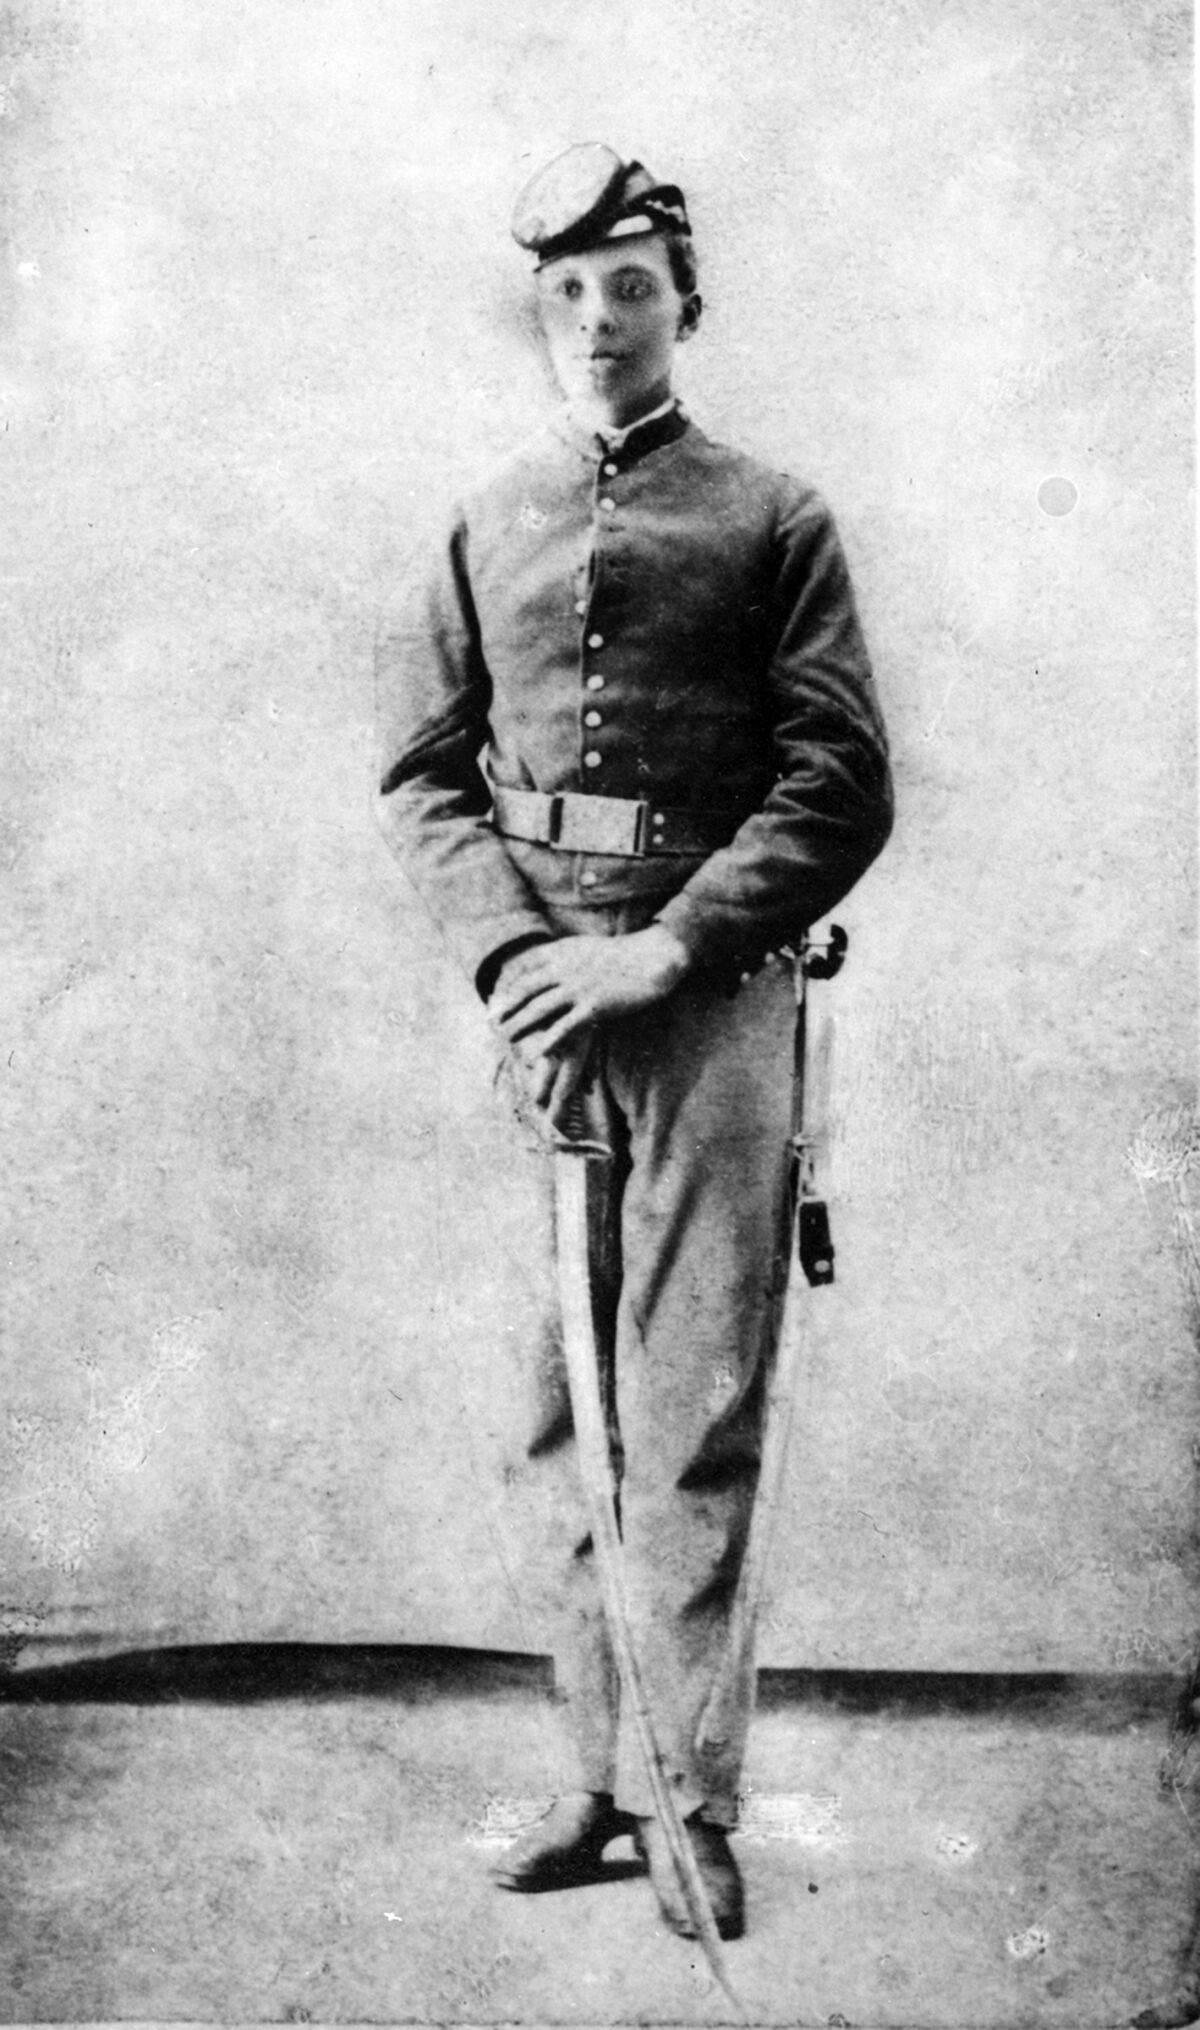 Amos Hudgins served in the 2nd Kansas Colored Infantry of the Union Army during the Civil War.